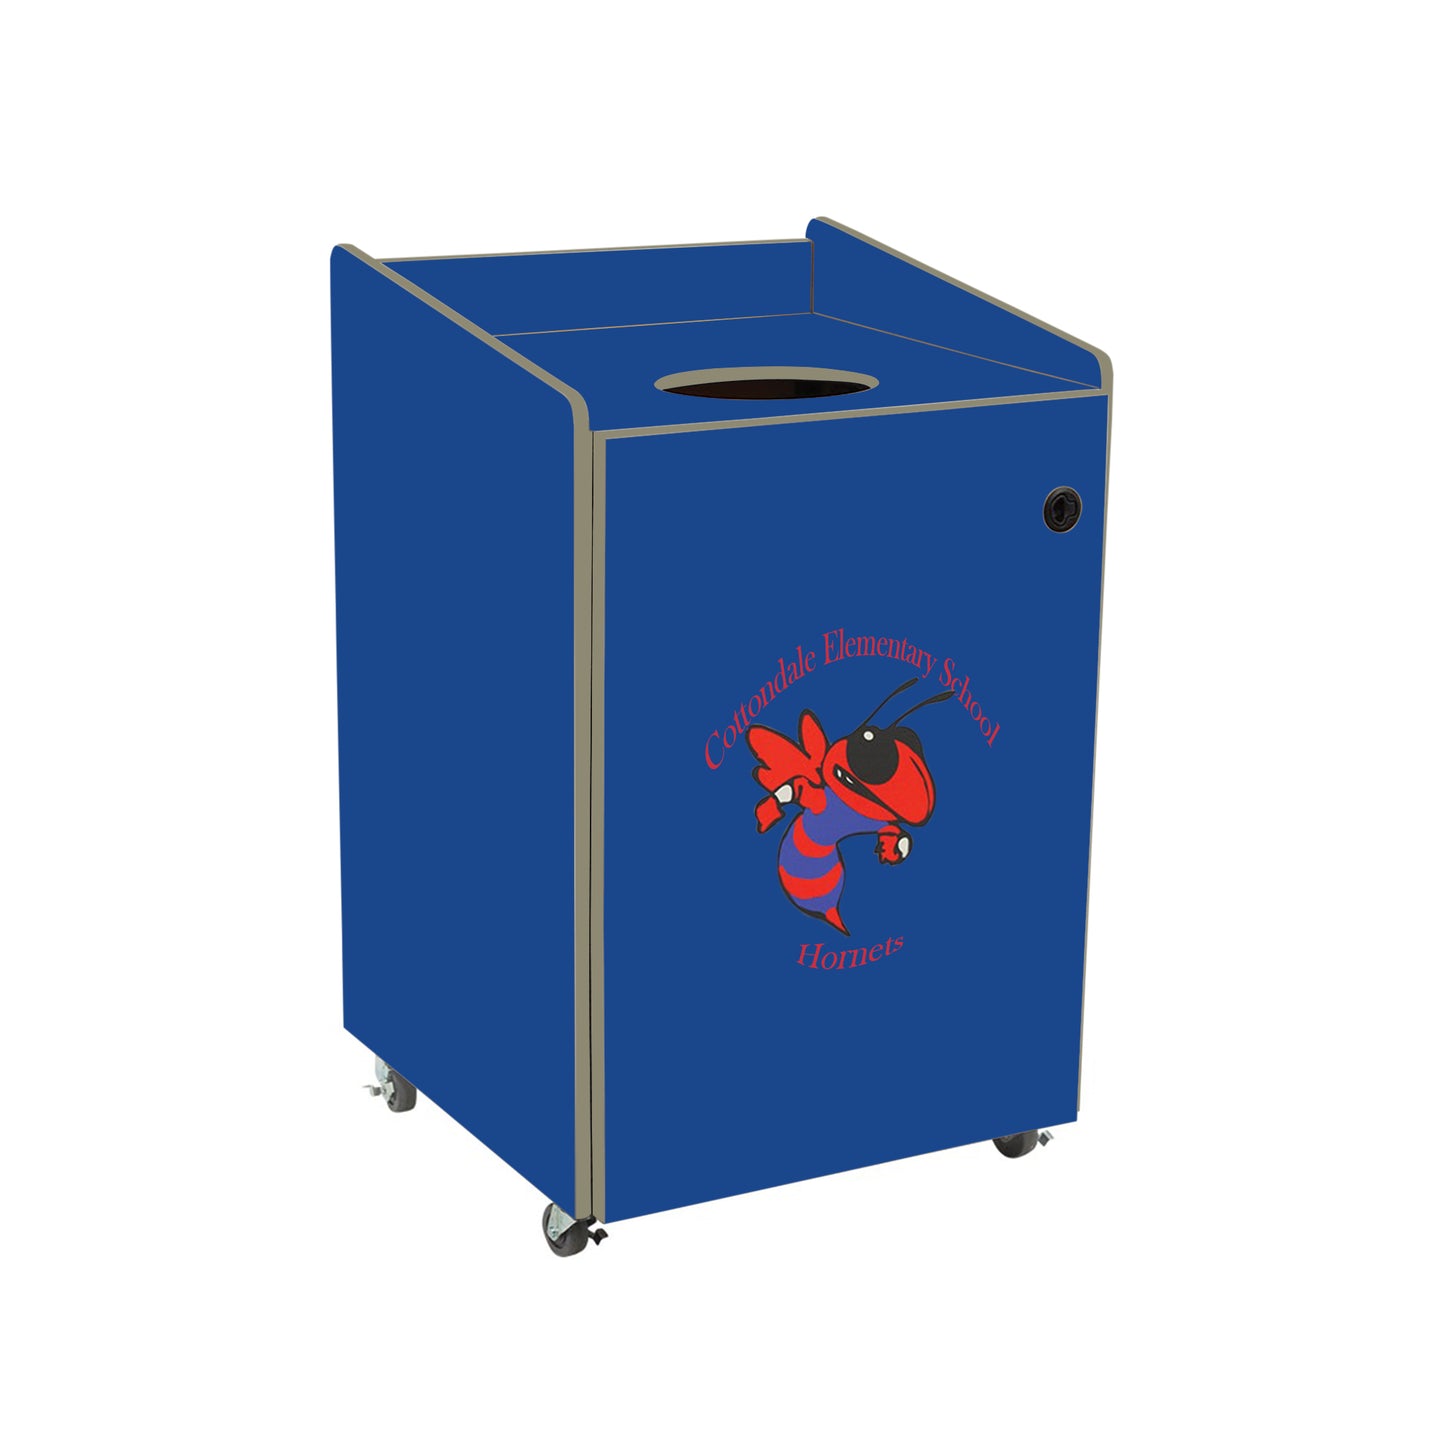 AmTab Heavy-Duty Waste Receptacle - Applicable for 55 Gallon Cans and Drums - 33"W x 32"L x 50"H  (AMT-HDWR55)